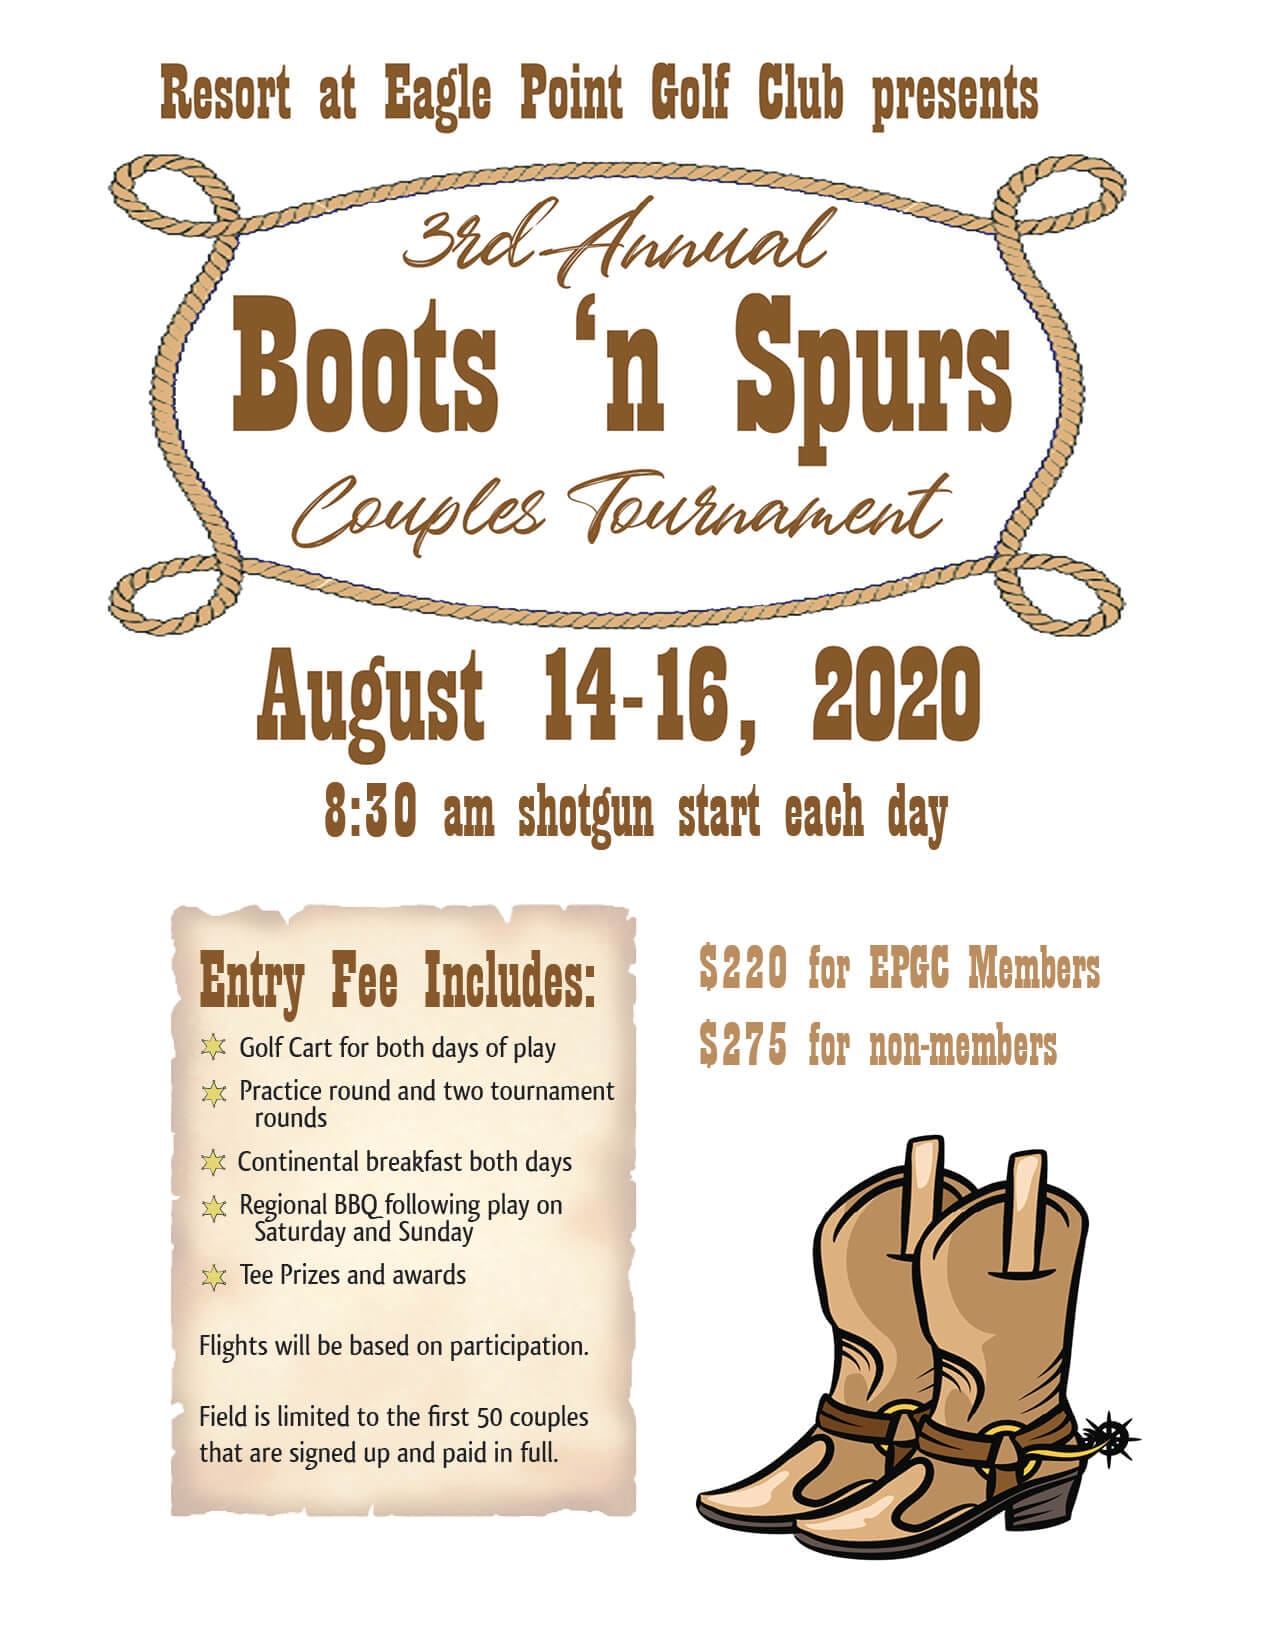 Boots and Spurs Couples Tournament - The Resort at Eagle Point